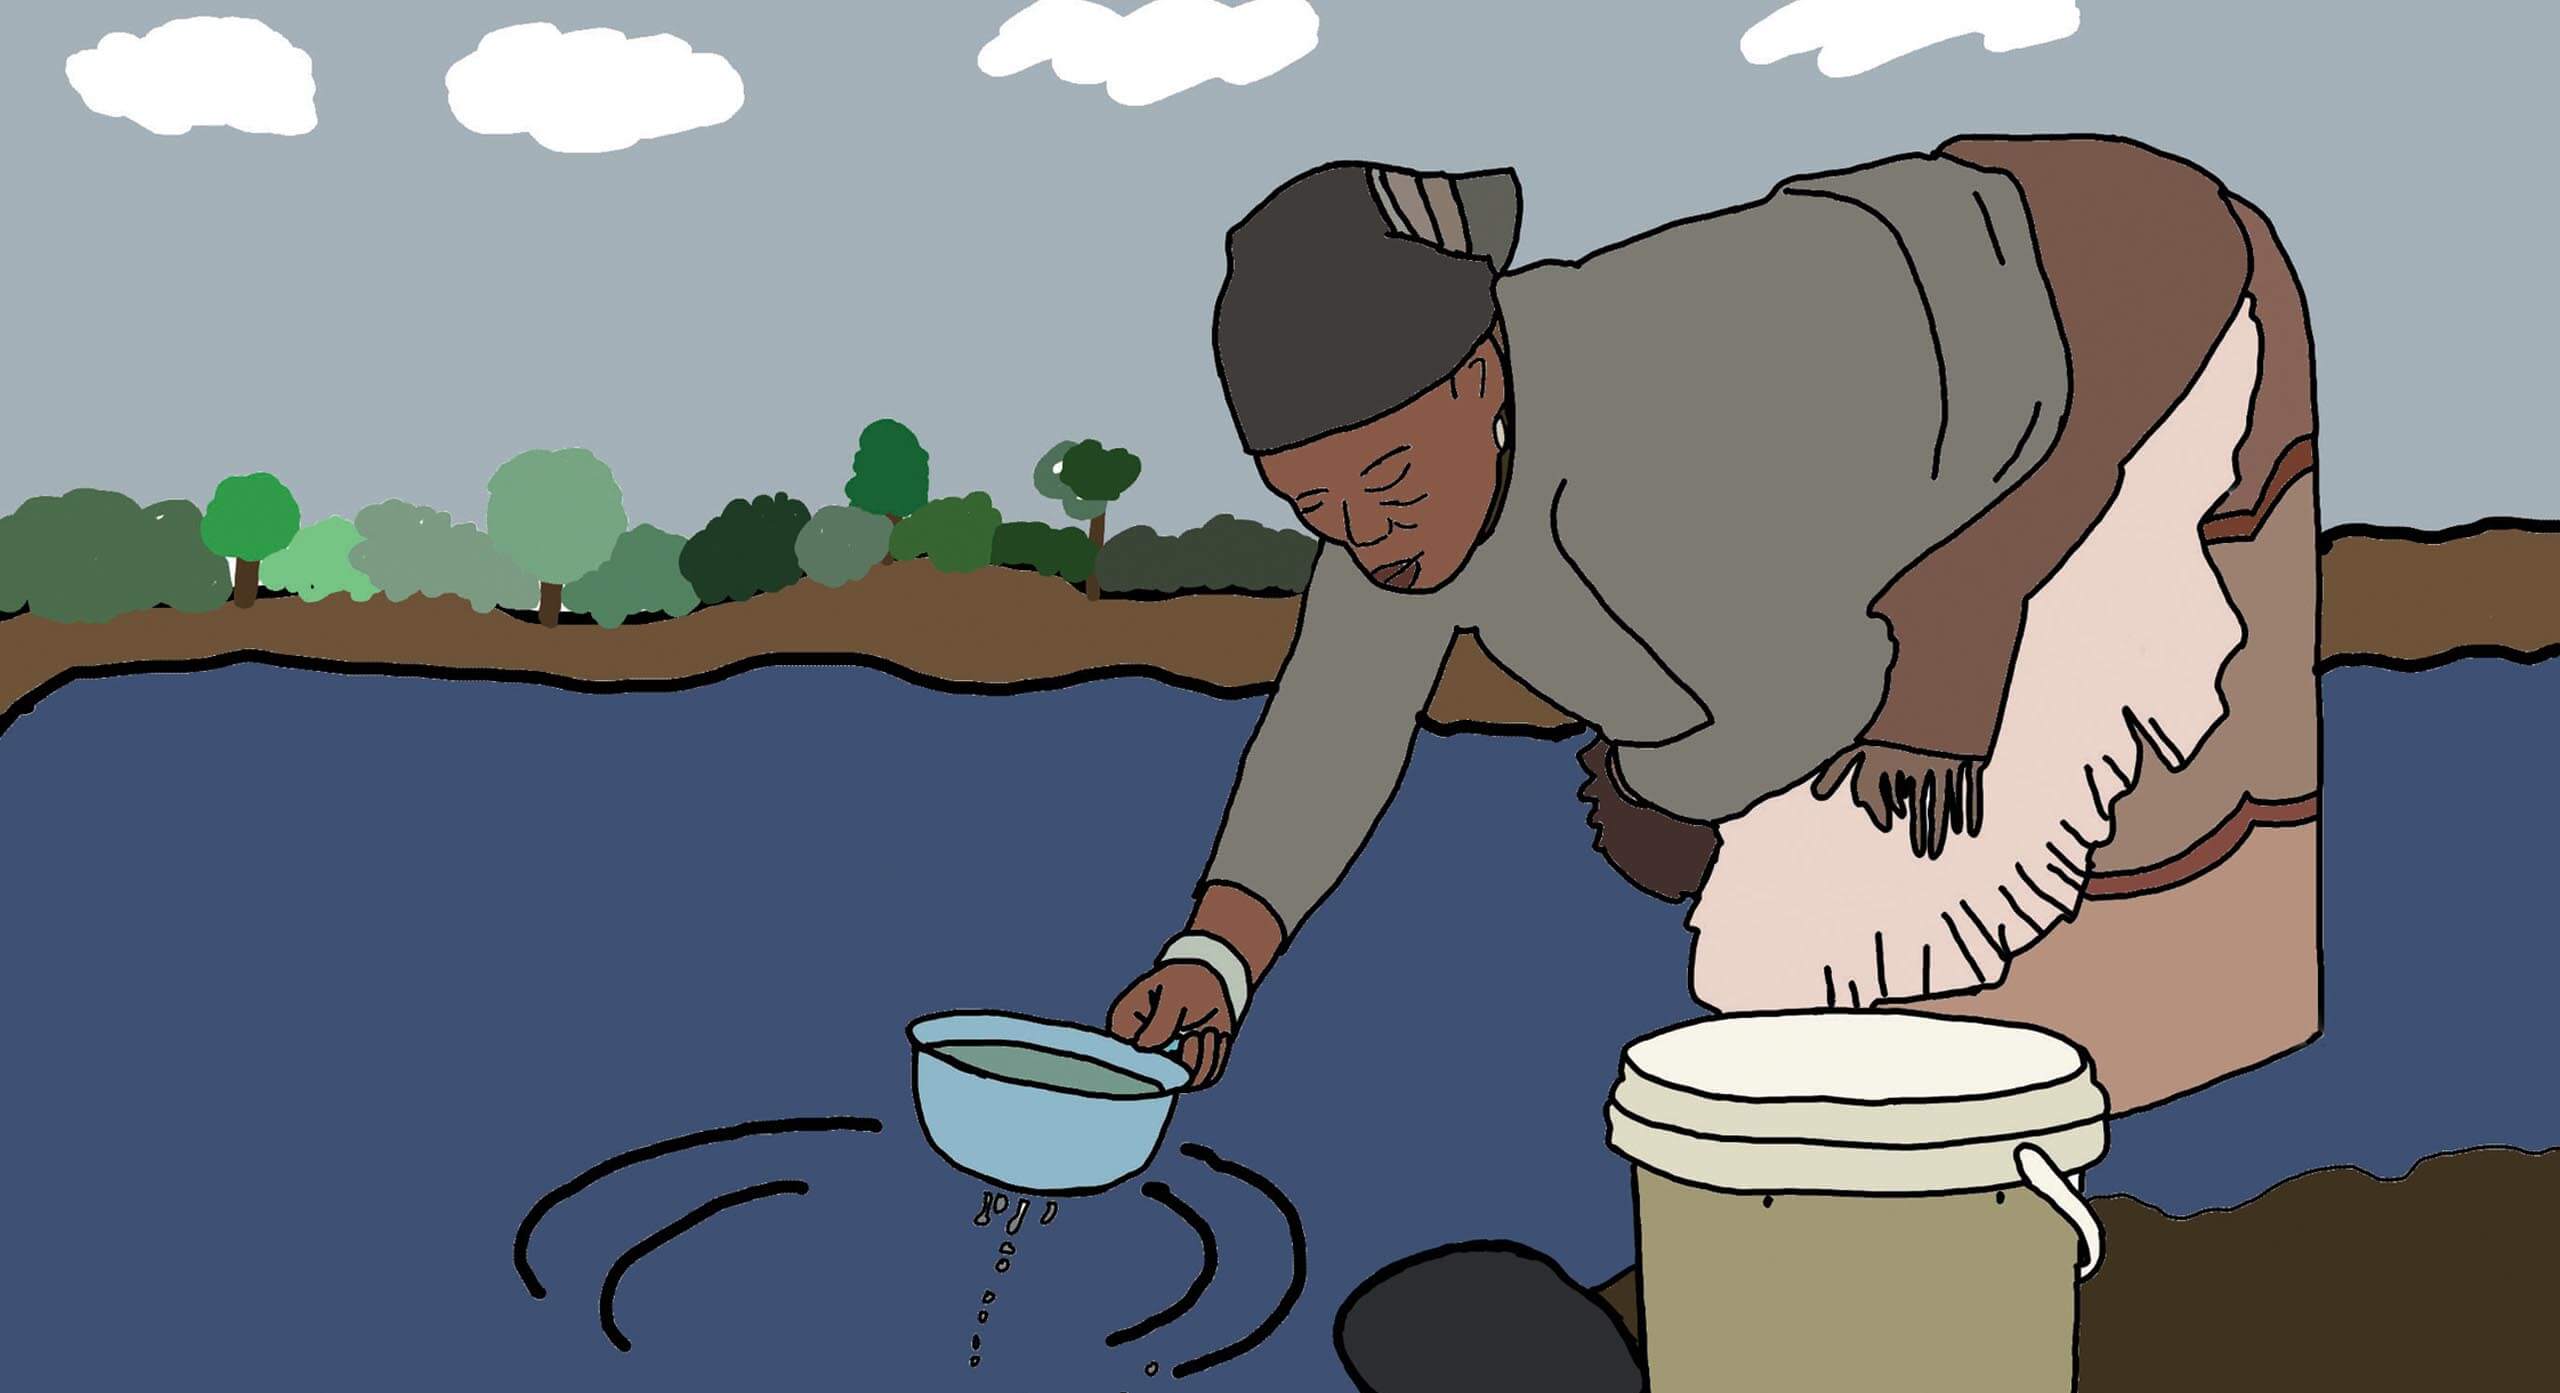 An illustration of a woman gathering water